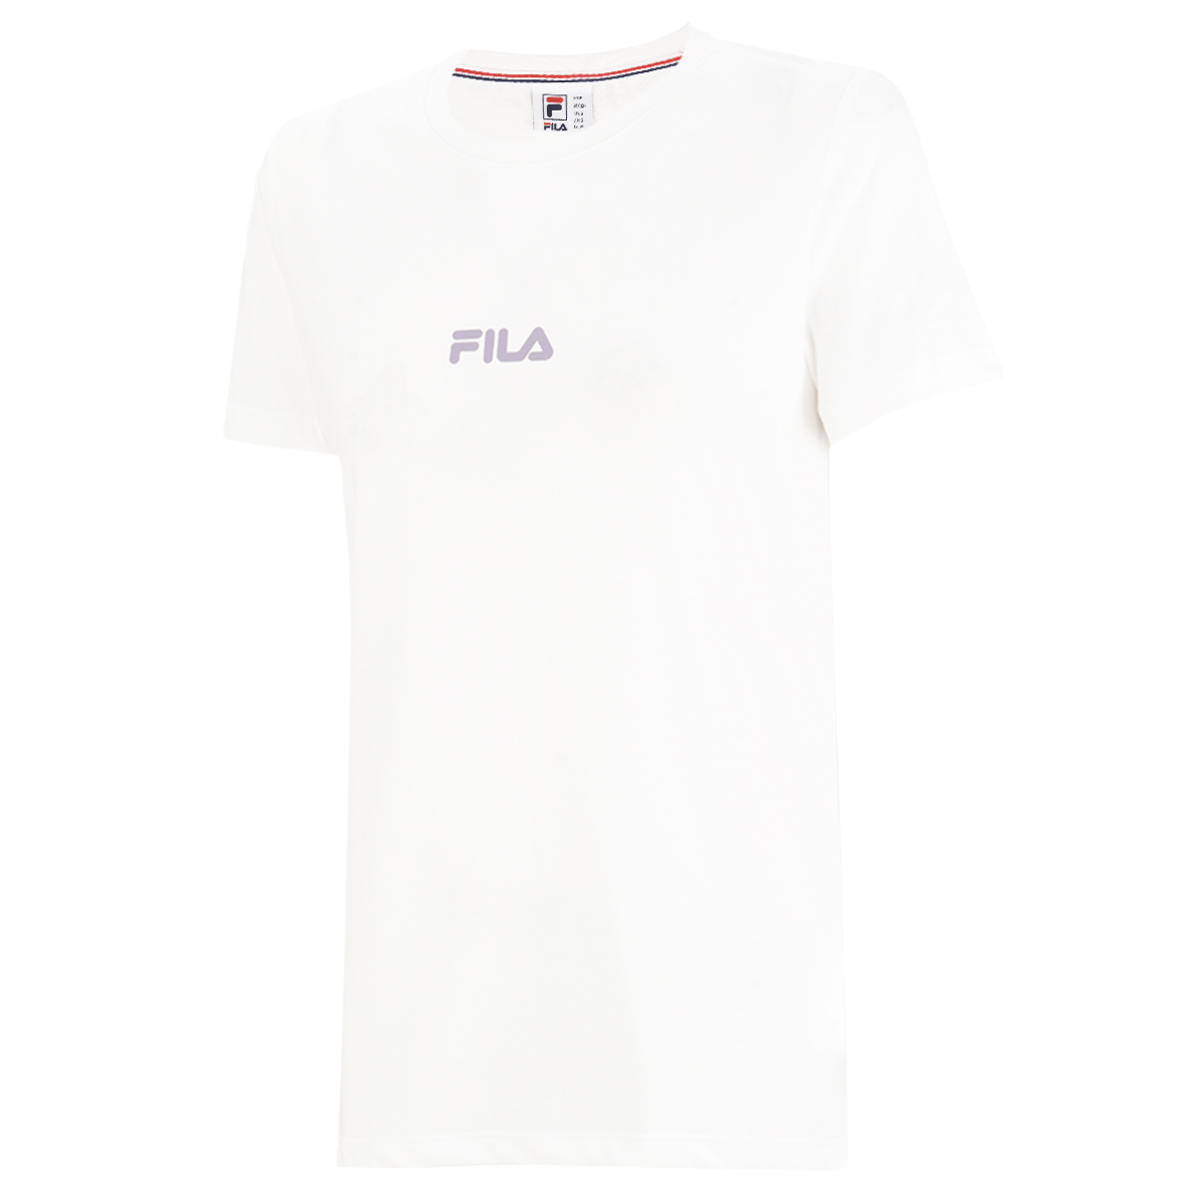 Remera Entrenamiento Fila Print Sports Mujer,  image number null